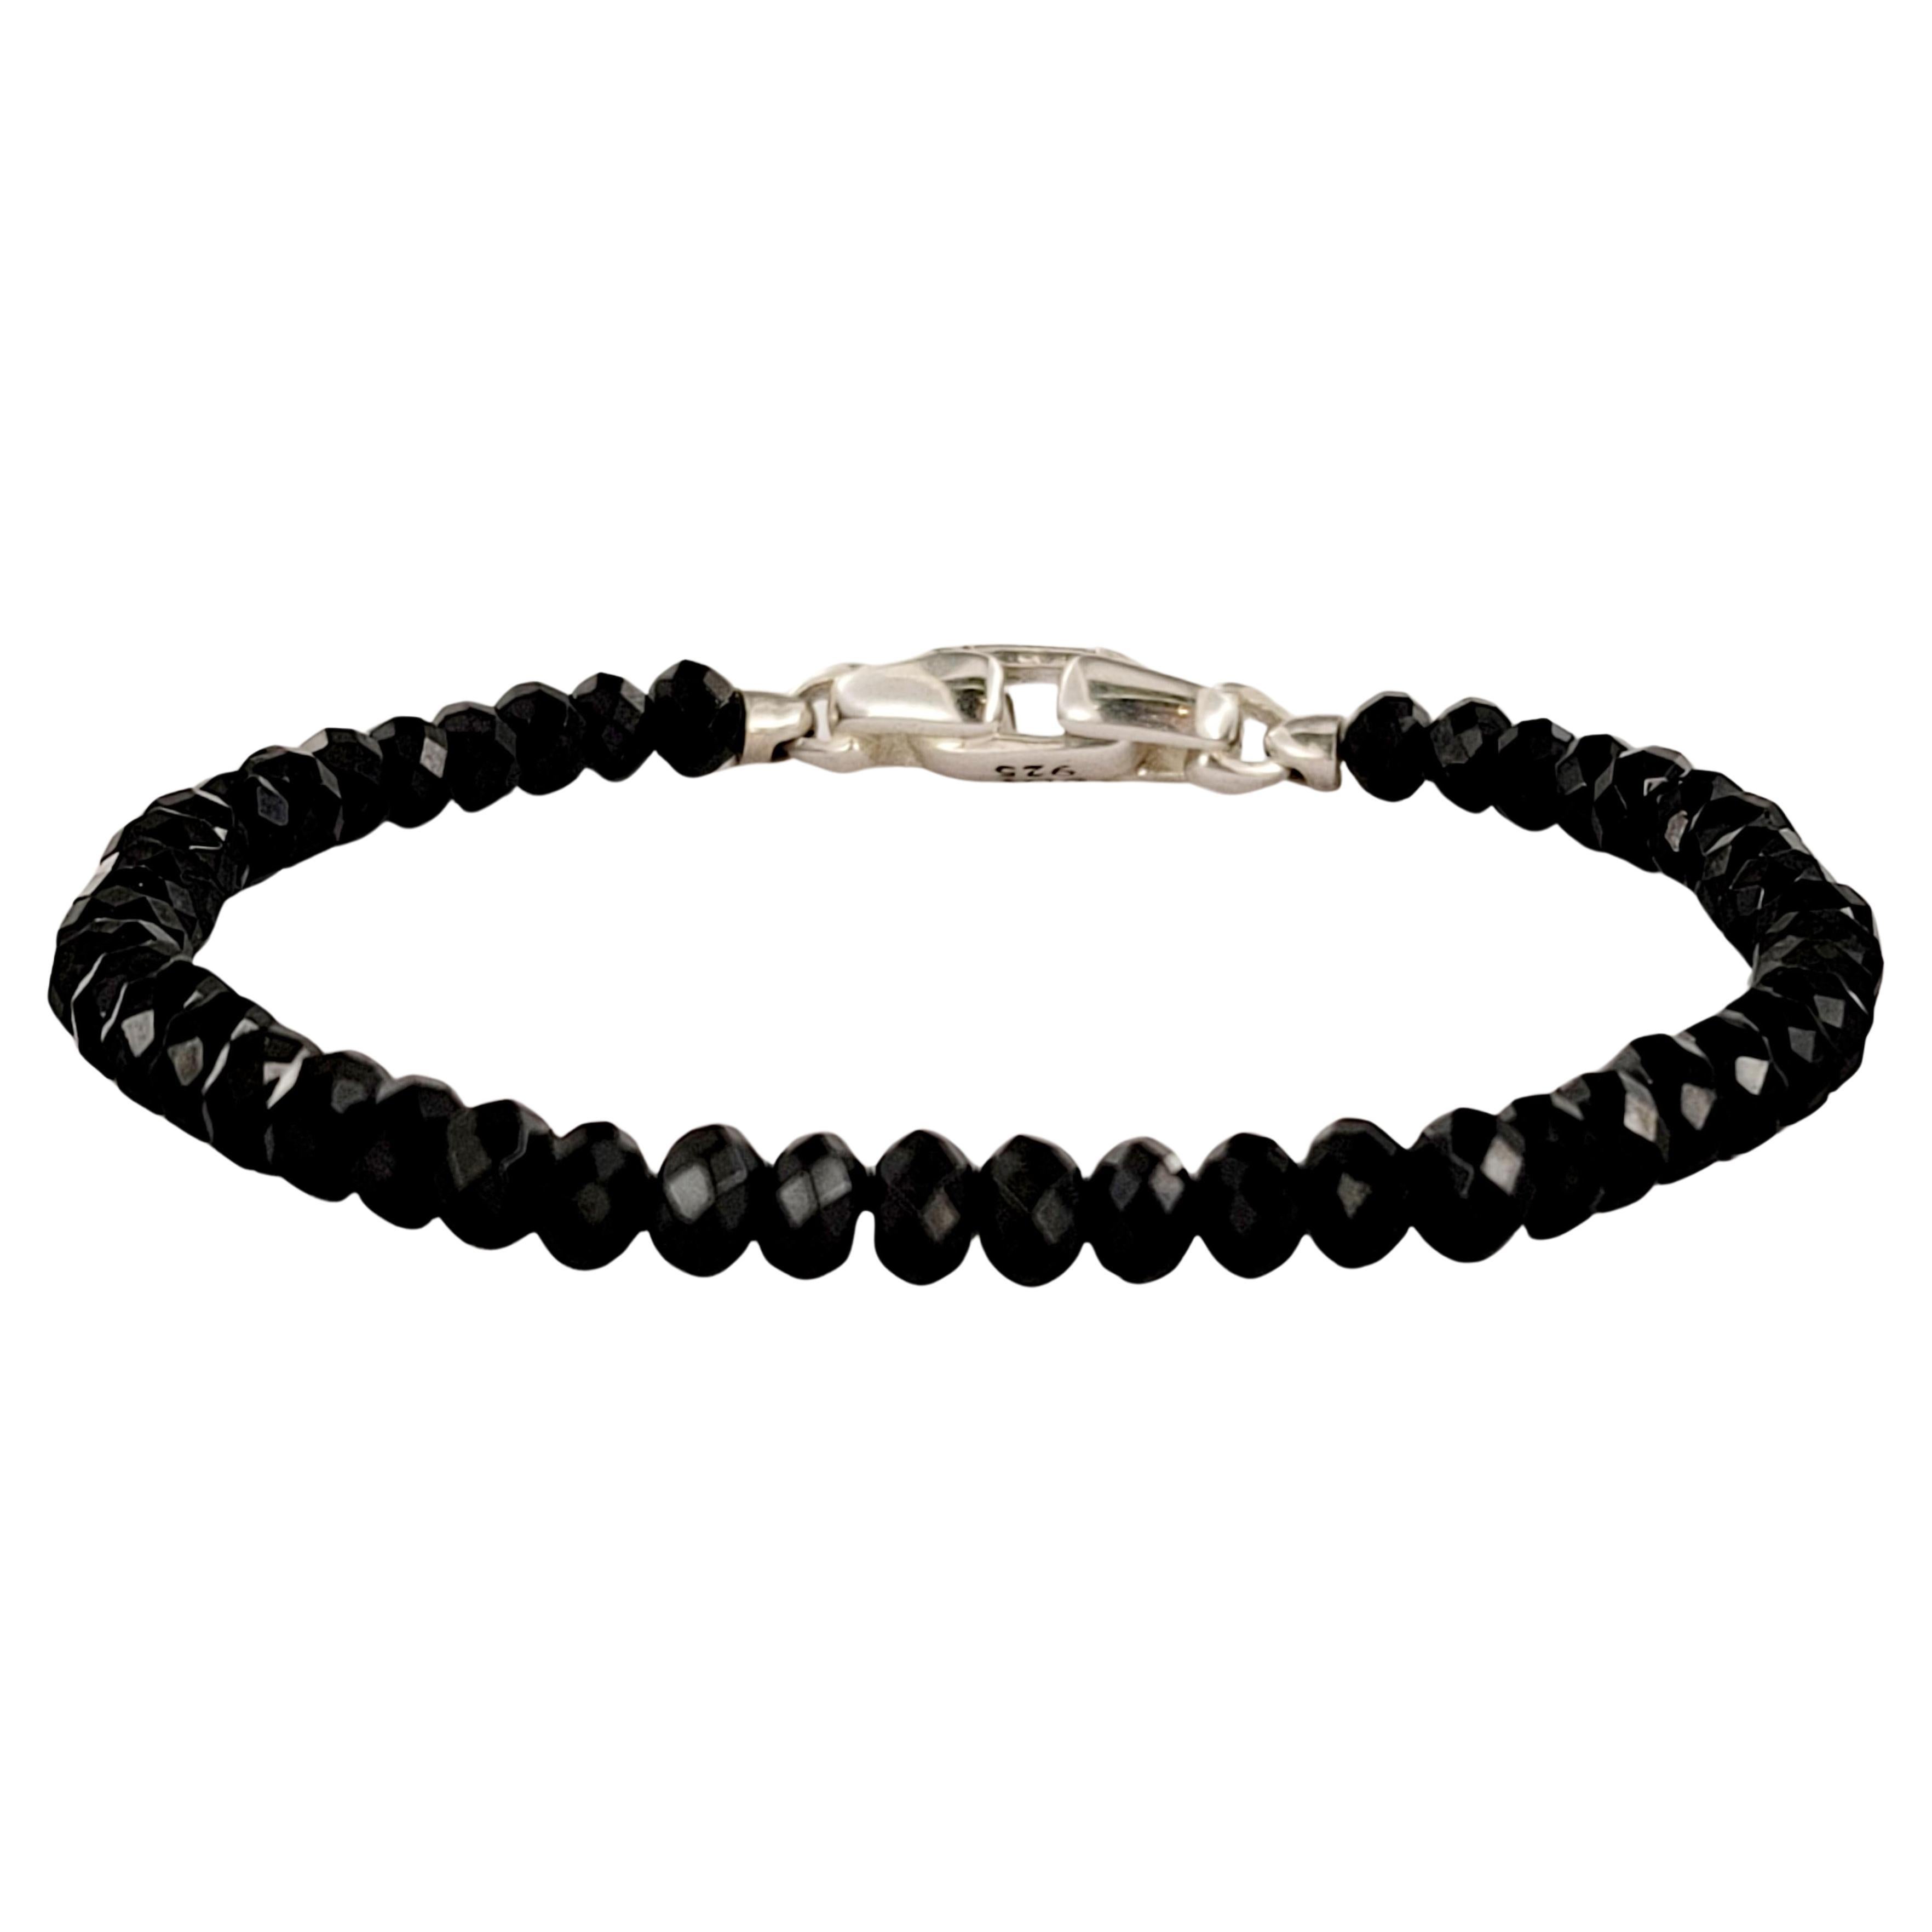 Spiritual Beads Faceted Bracelet Sterling Silver with Black Spinel, 5mm For Sale